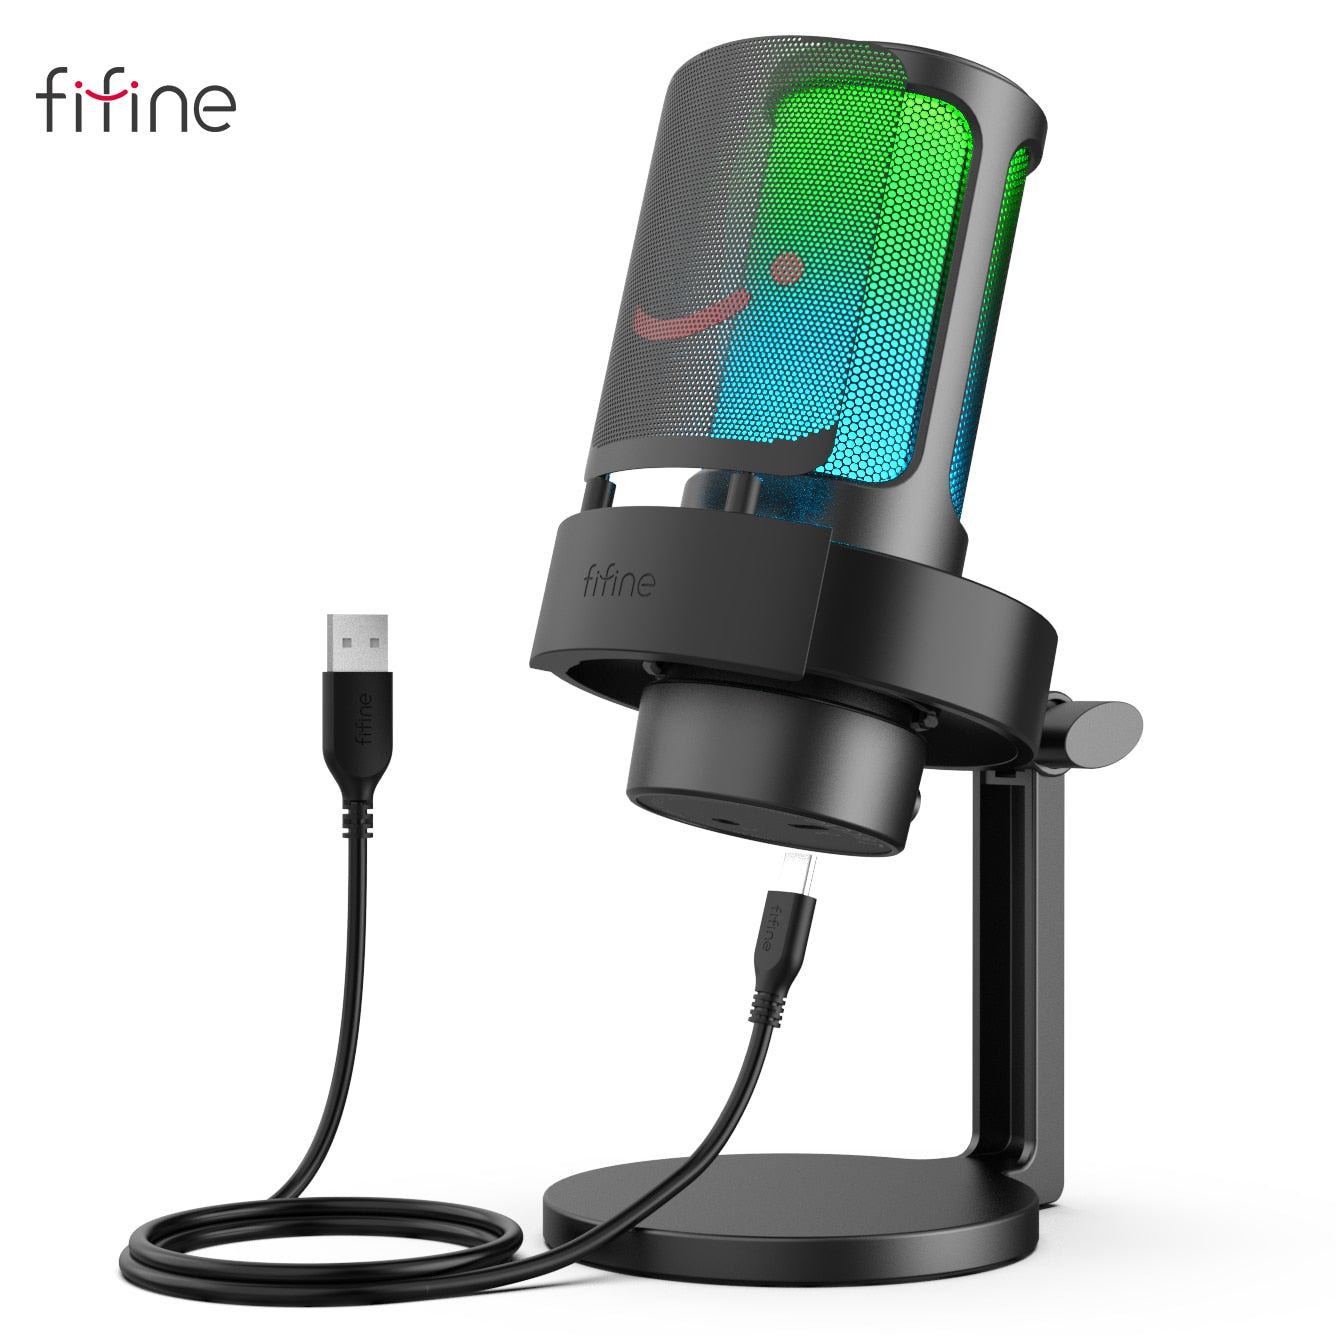 "FIFINE" USB Microphone for Recording and Streaming -A8 - Almondscove